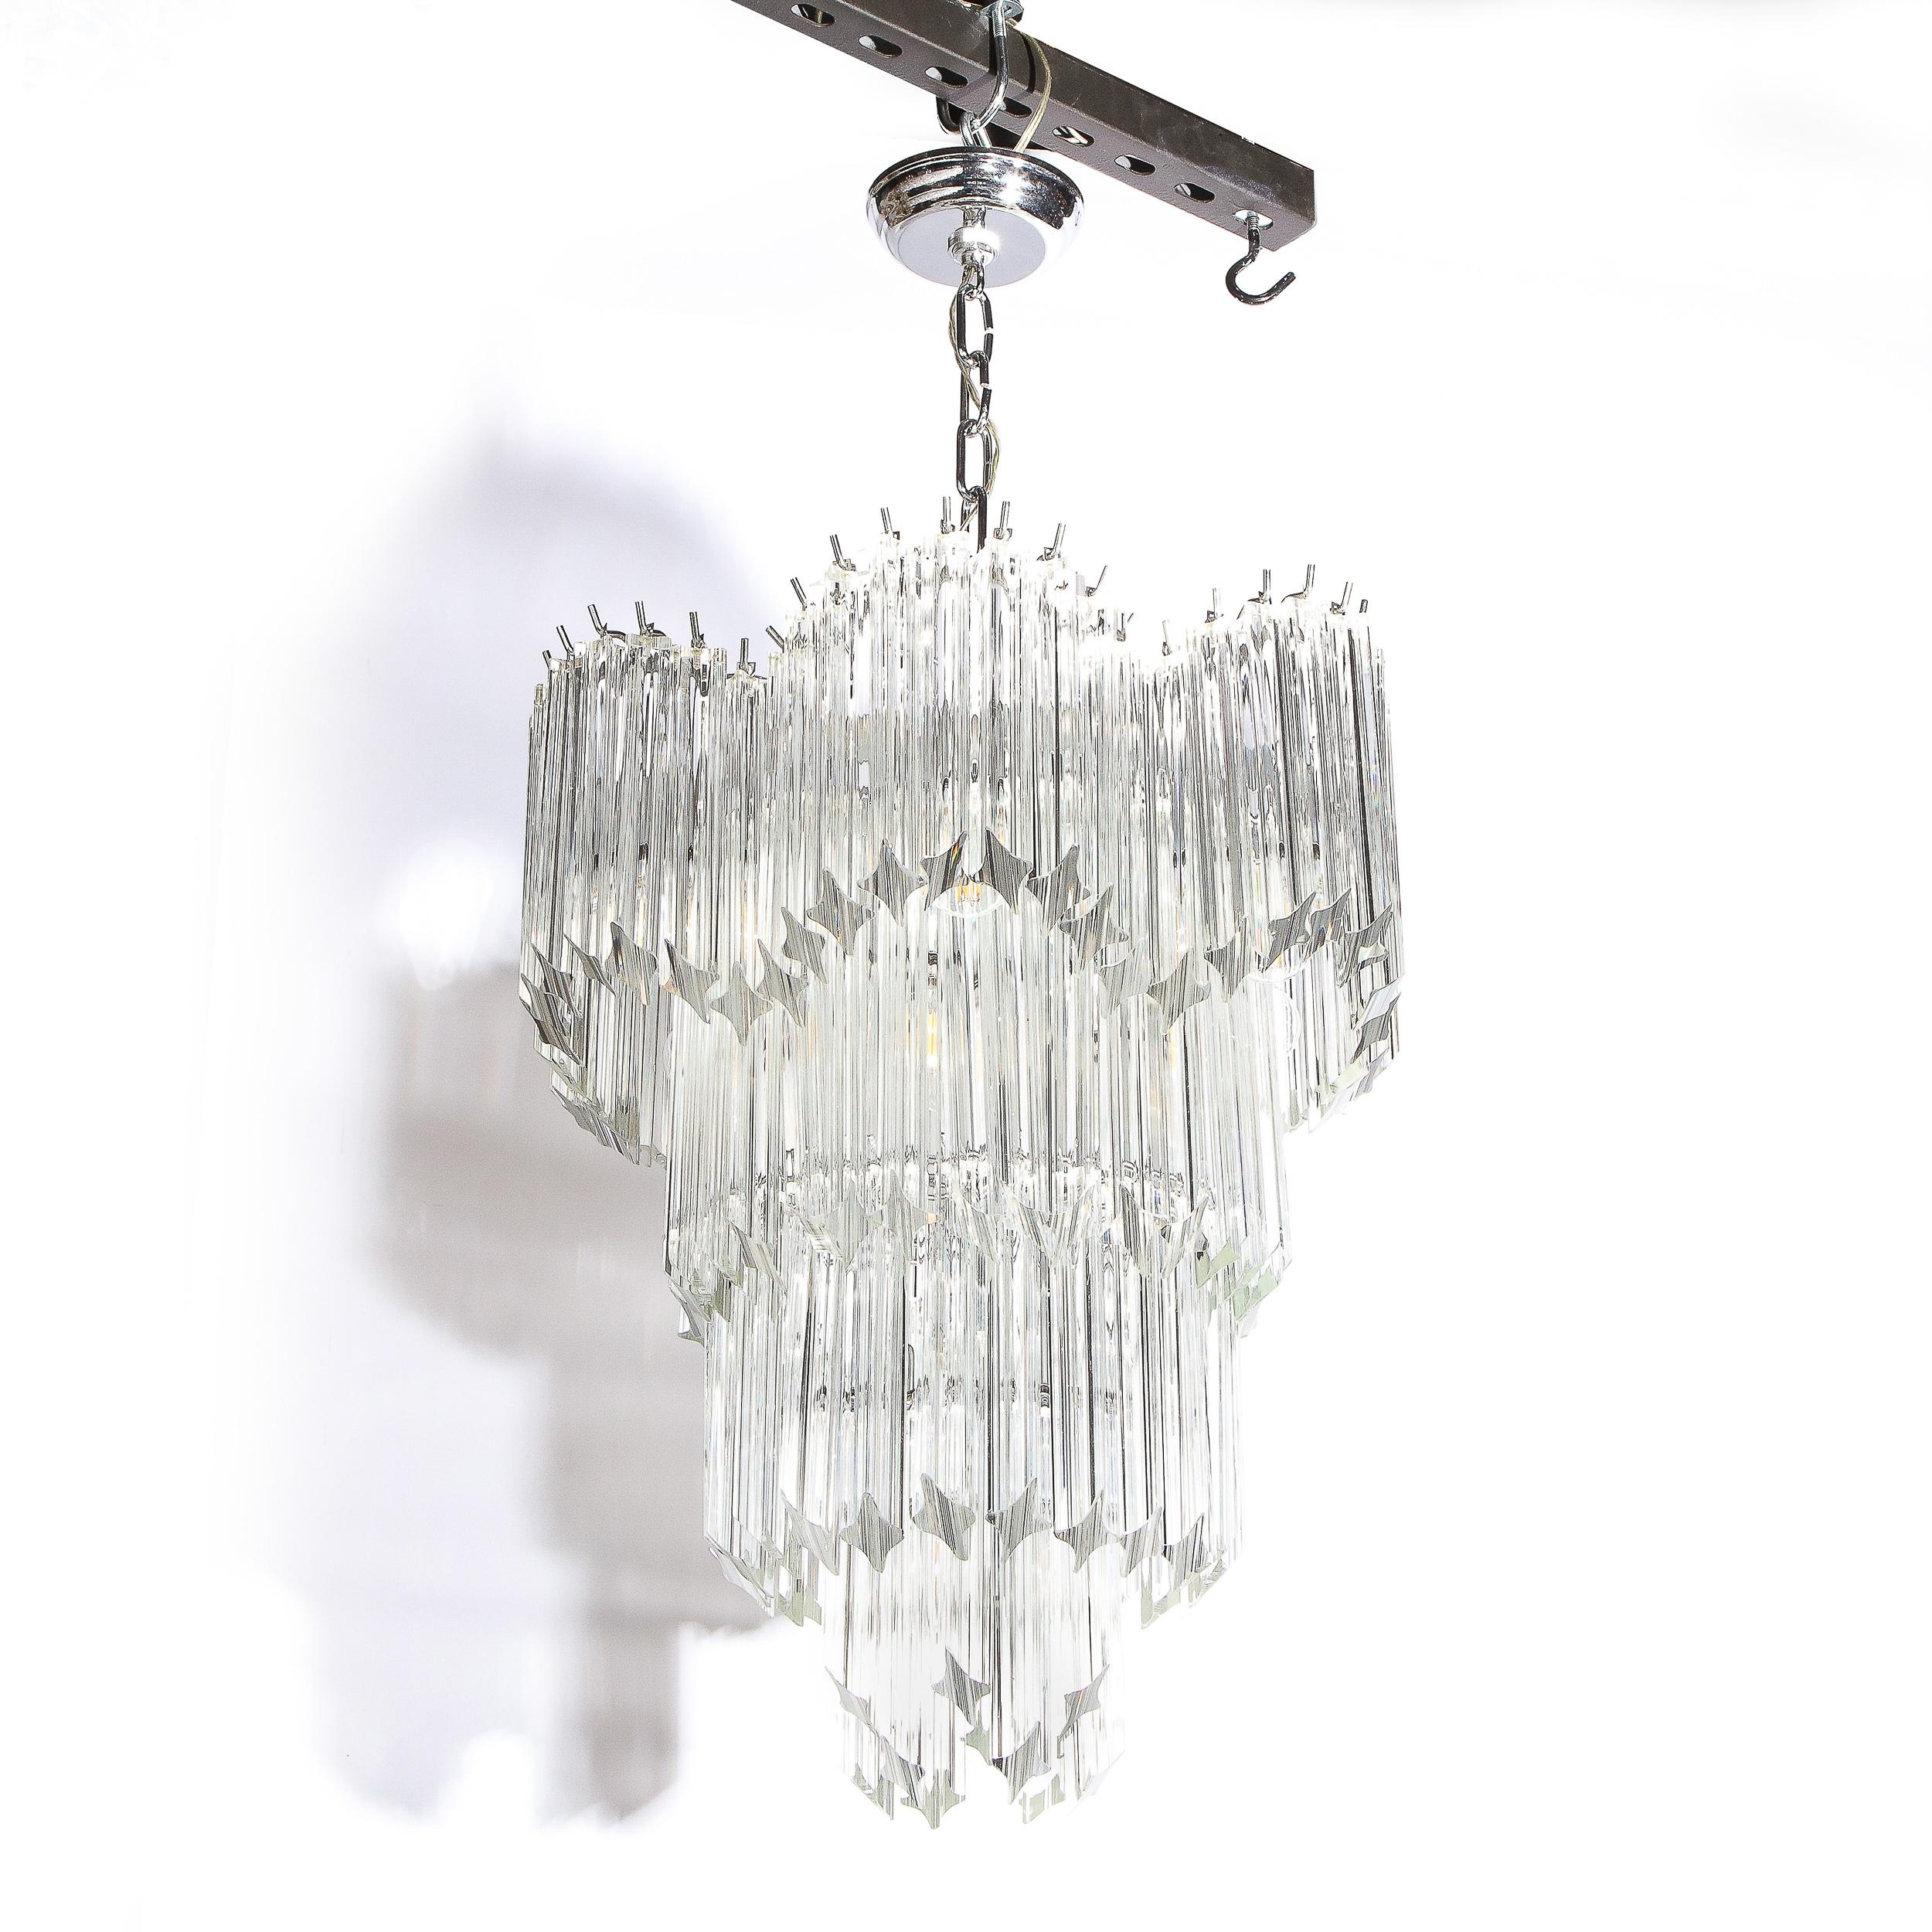 Late 20th Century Mid-Century Modernist Scalloped Four-Tier Cut Triedre Crystal Camer Chandelier For Sale